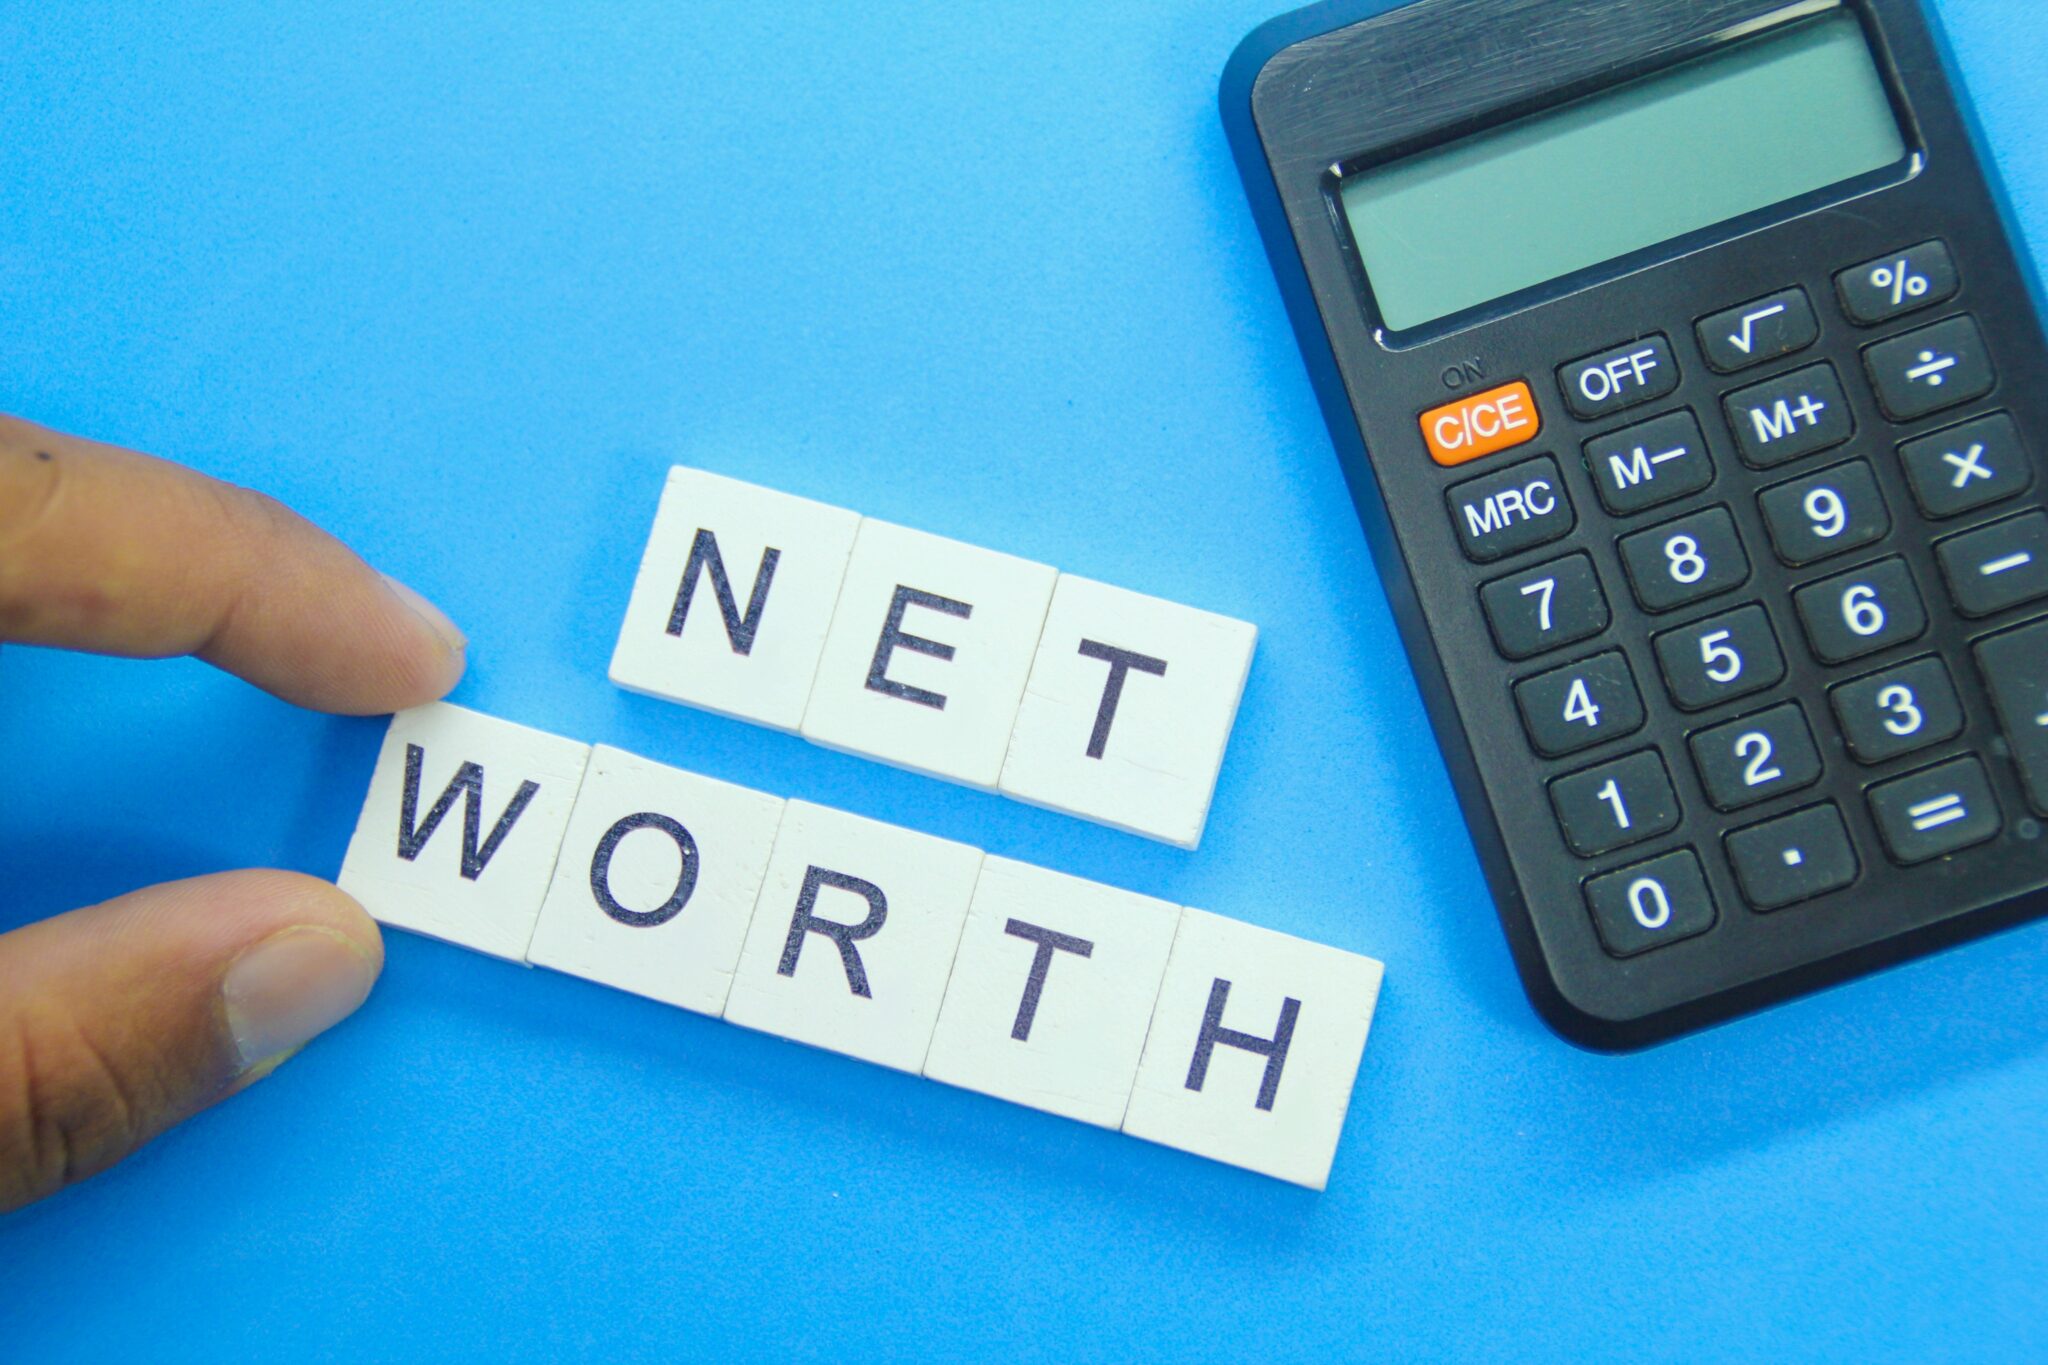 Top 5 Benefits Of Personalized Financial Services For High-Net-Worth Individuals